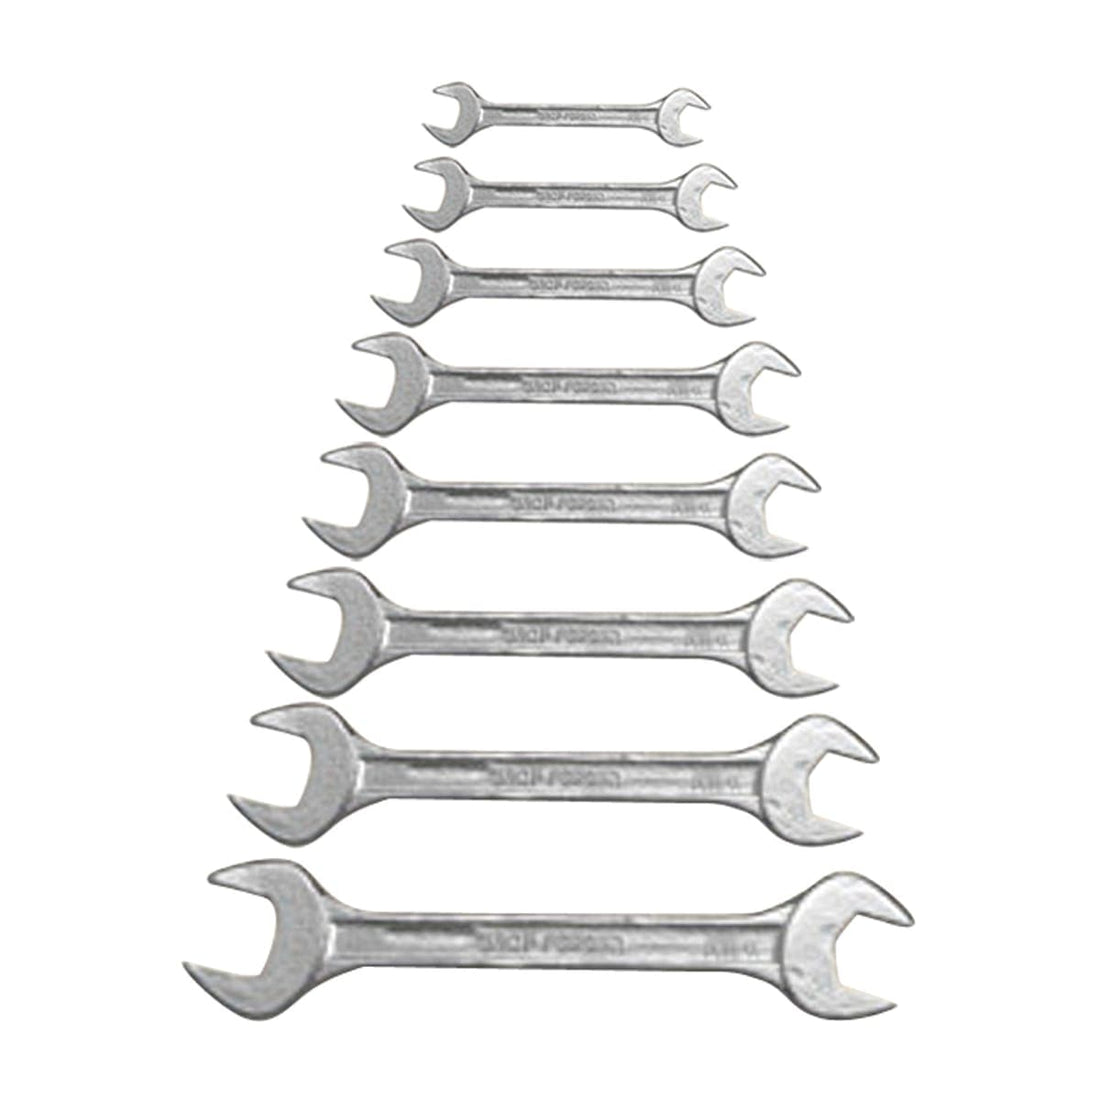 SET OF 8 ASSORTED FORGED STEEL SPANNERS